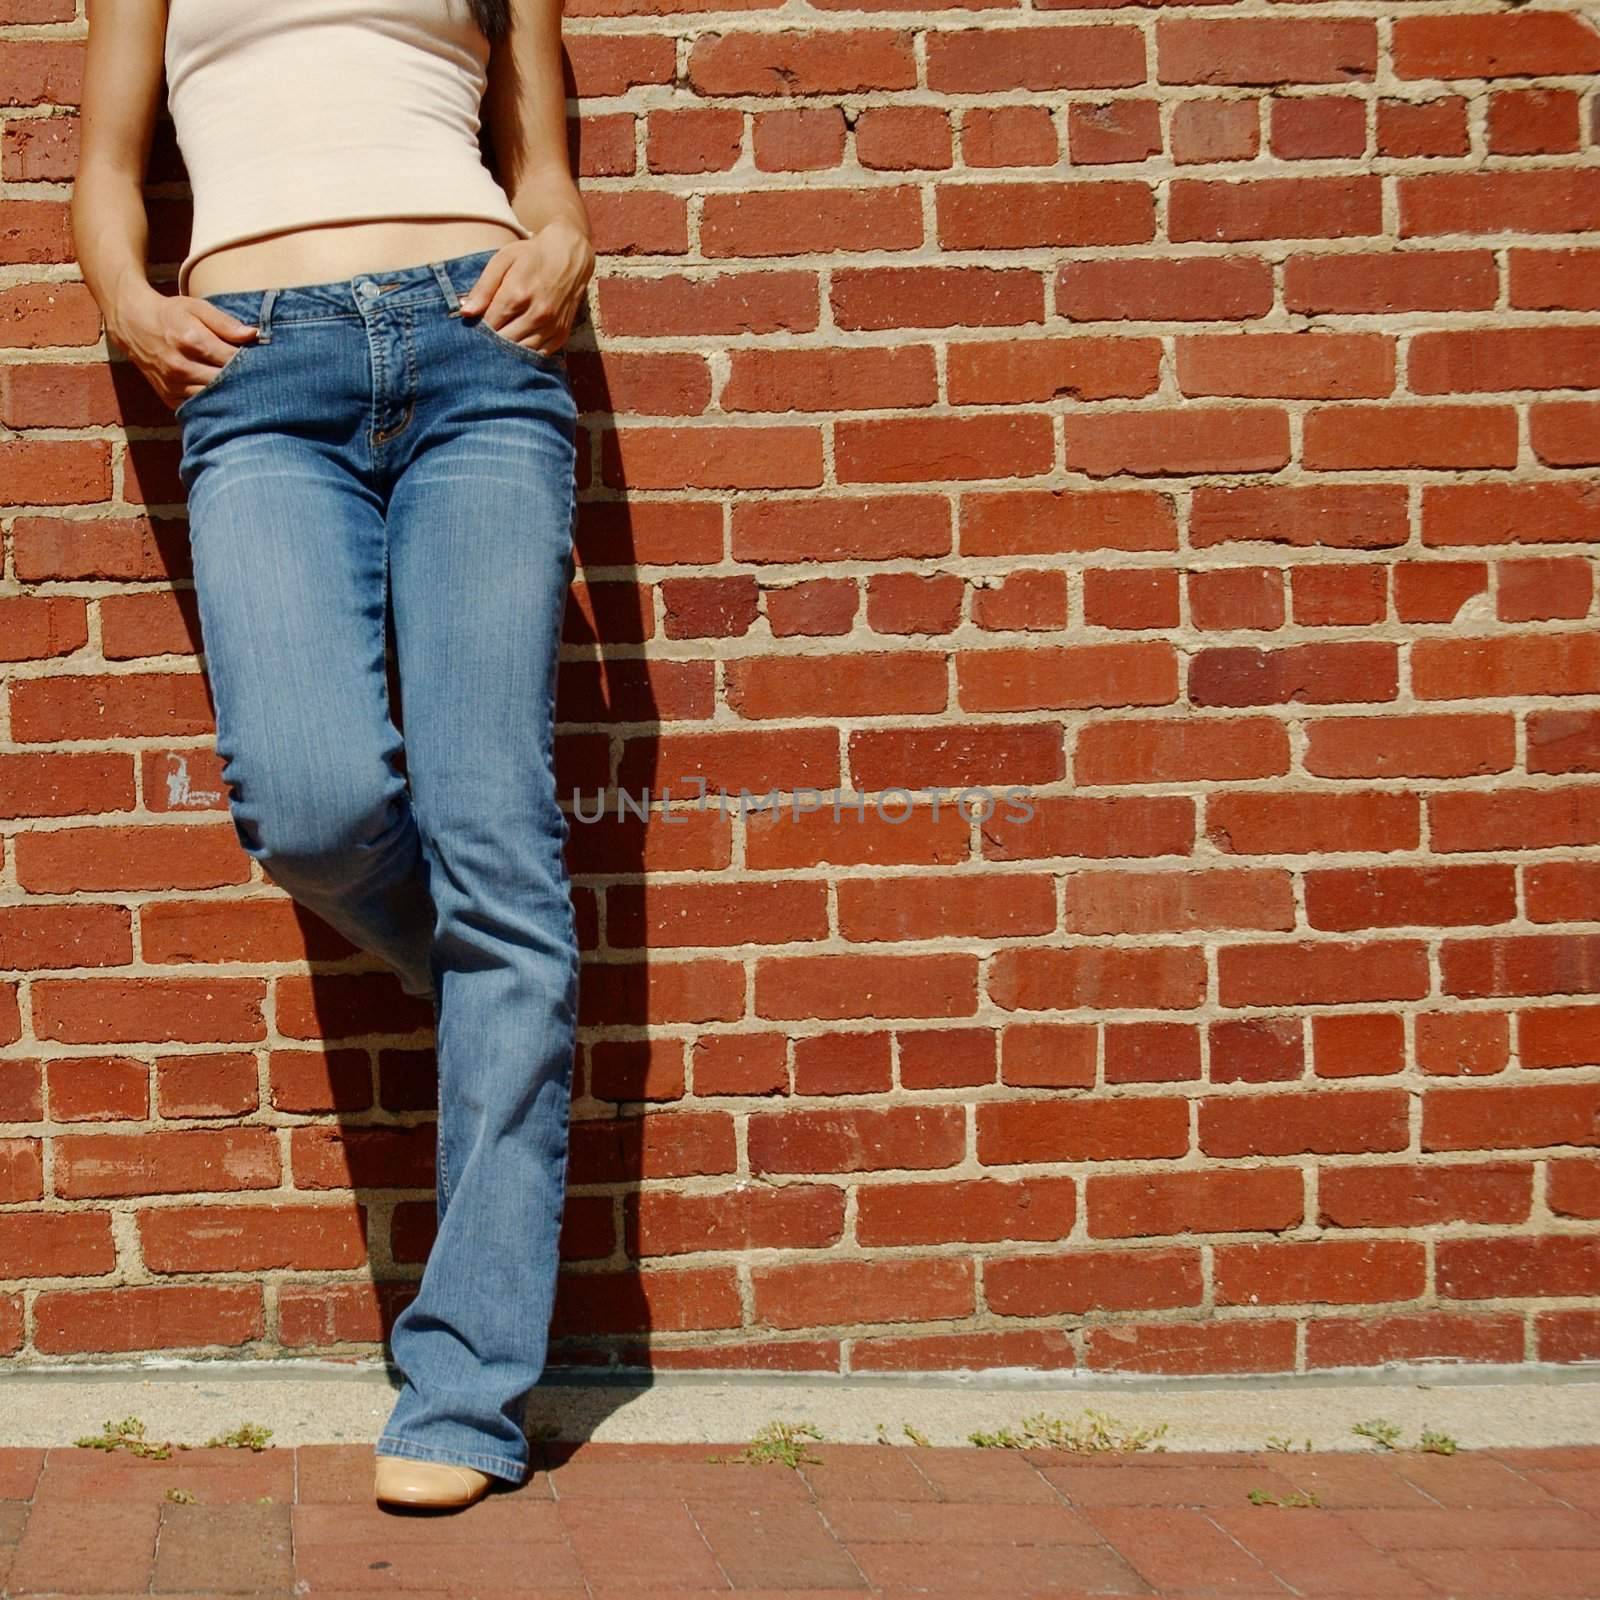 Fashionable closeups of womans mid section against brick wall.